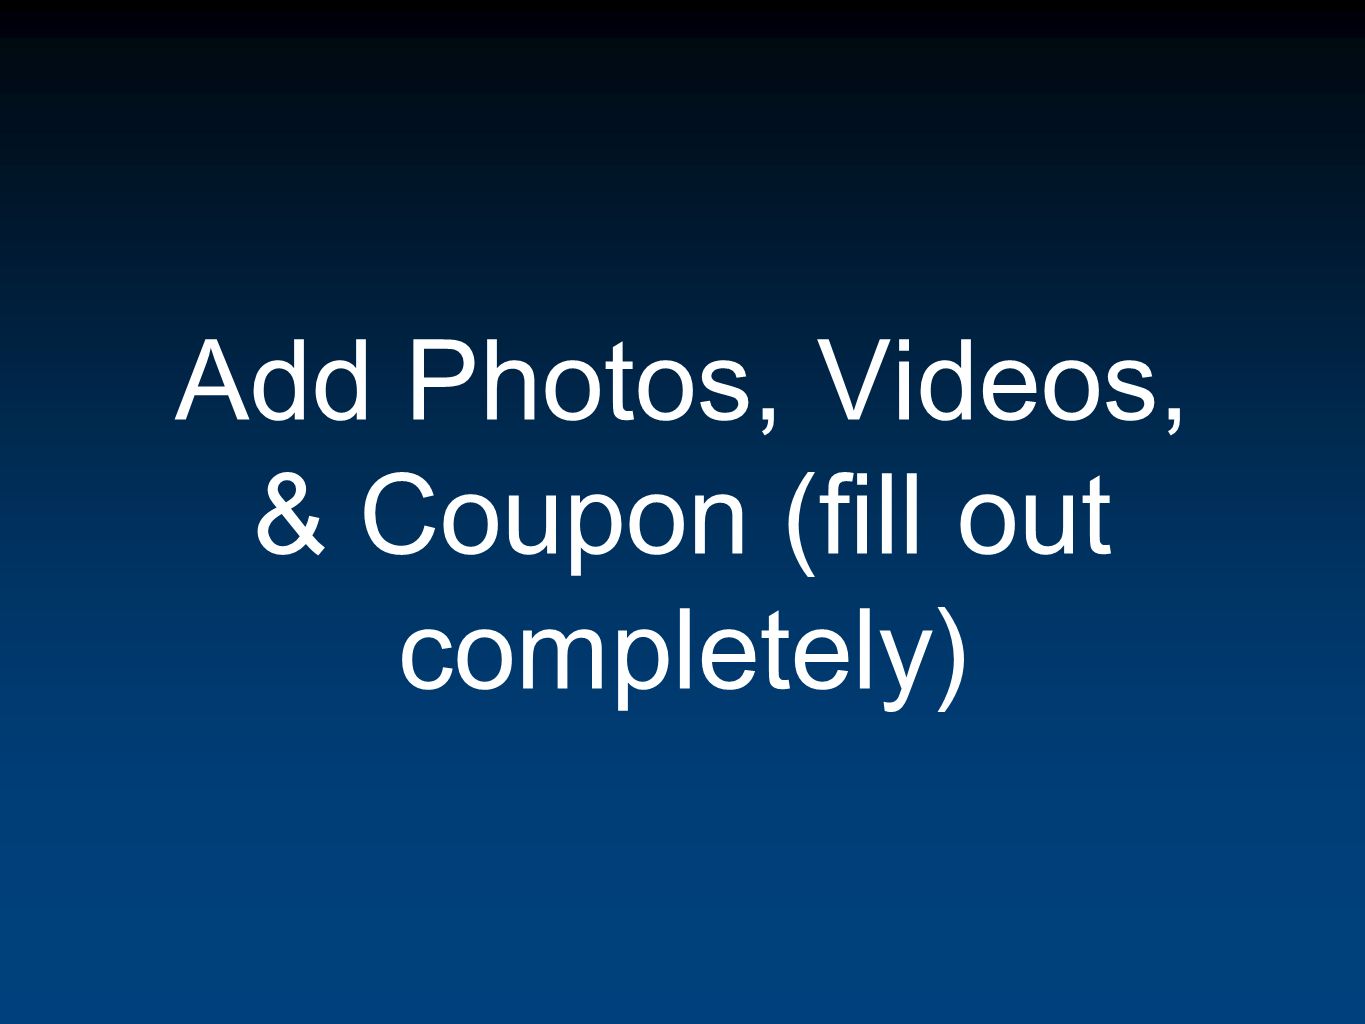 Add Photos, Videos, & Coupon (fill out completely)